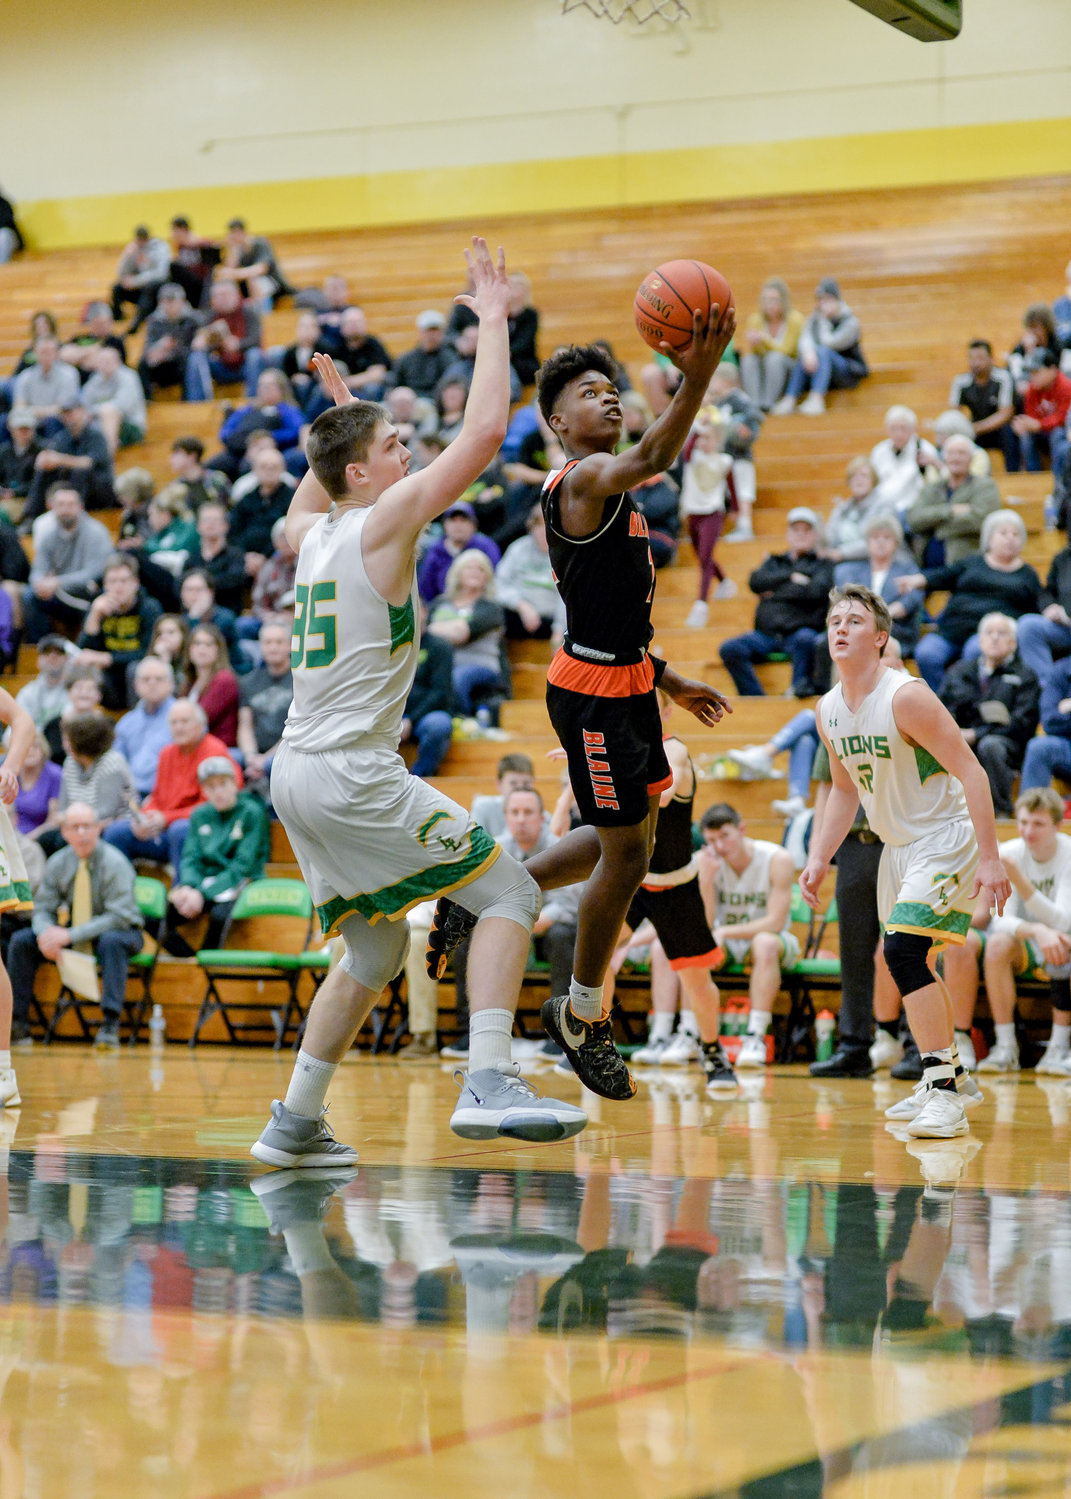 Josh Russ goes for a lay-in against Lynden on February 3 at Lynden High School.